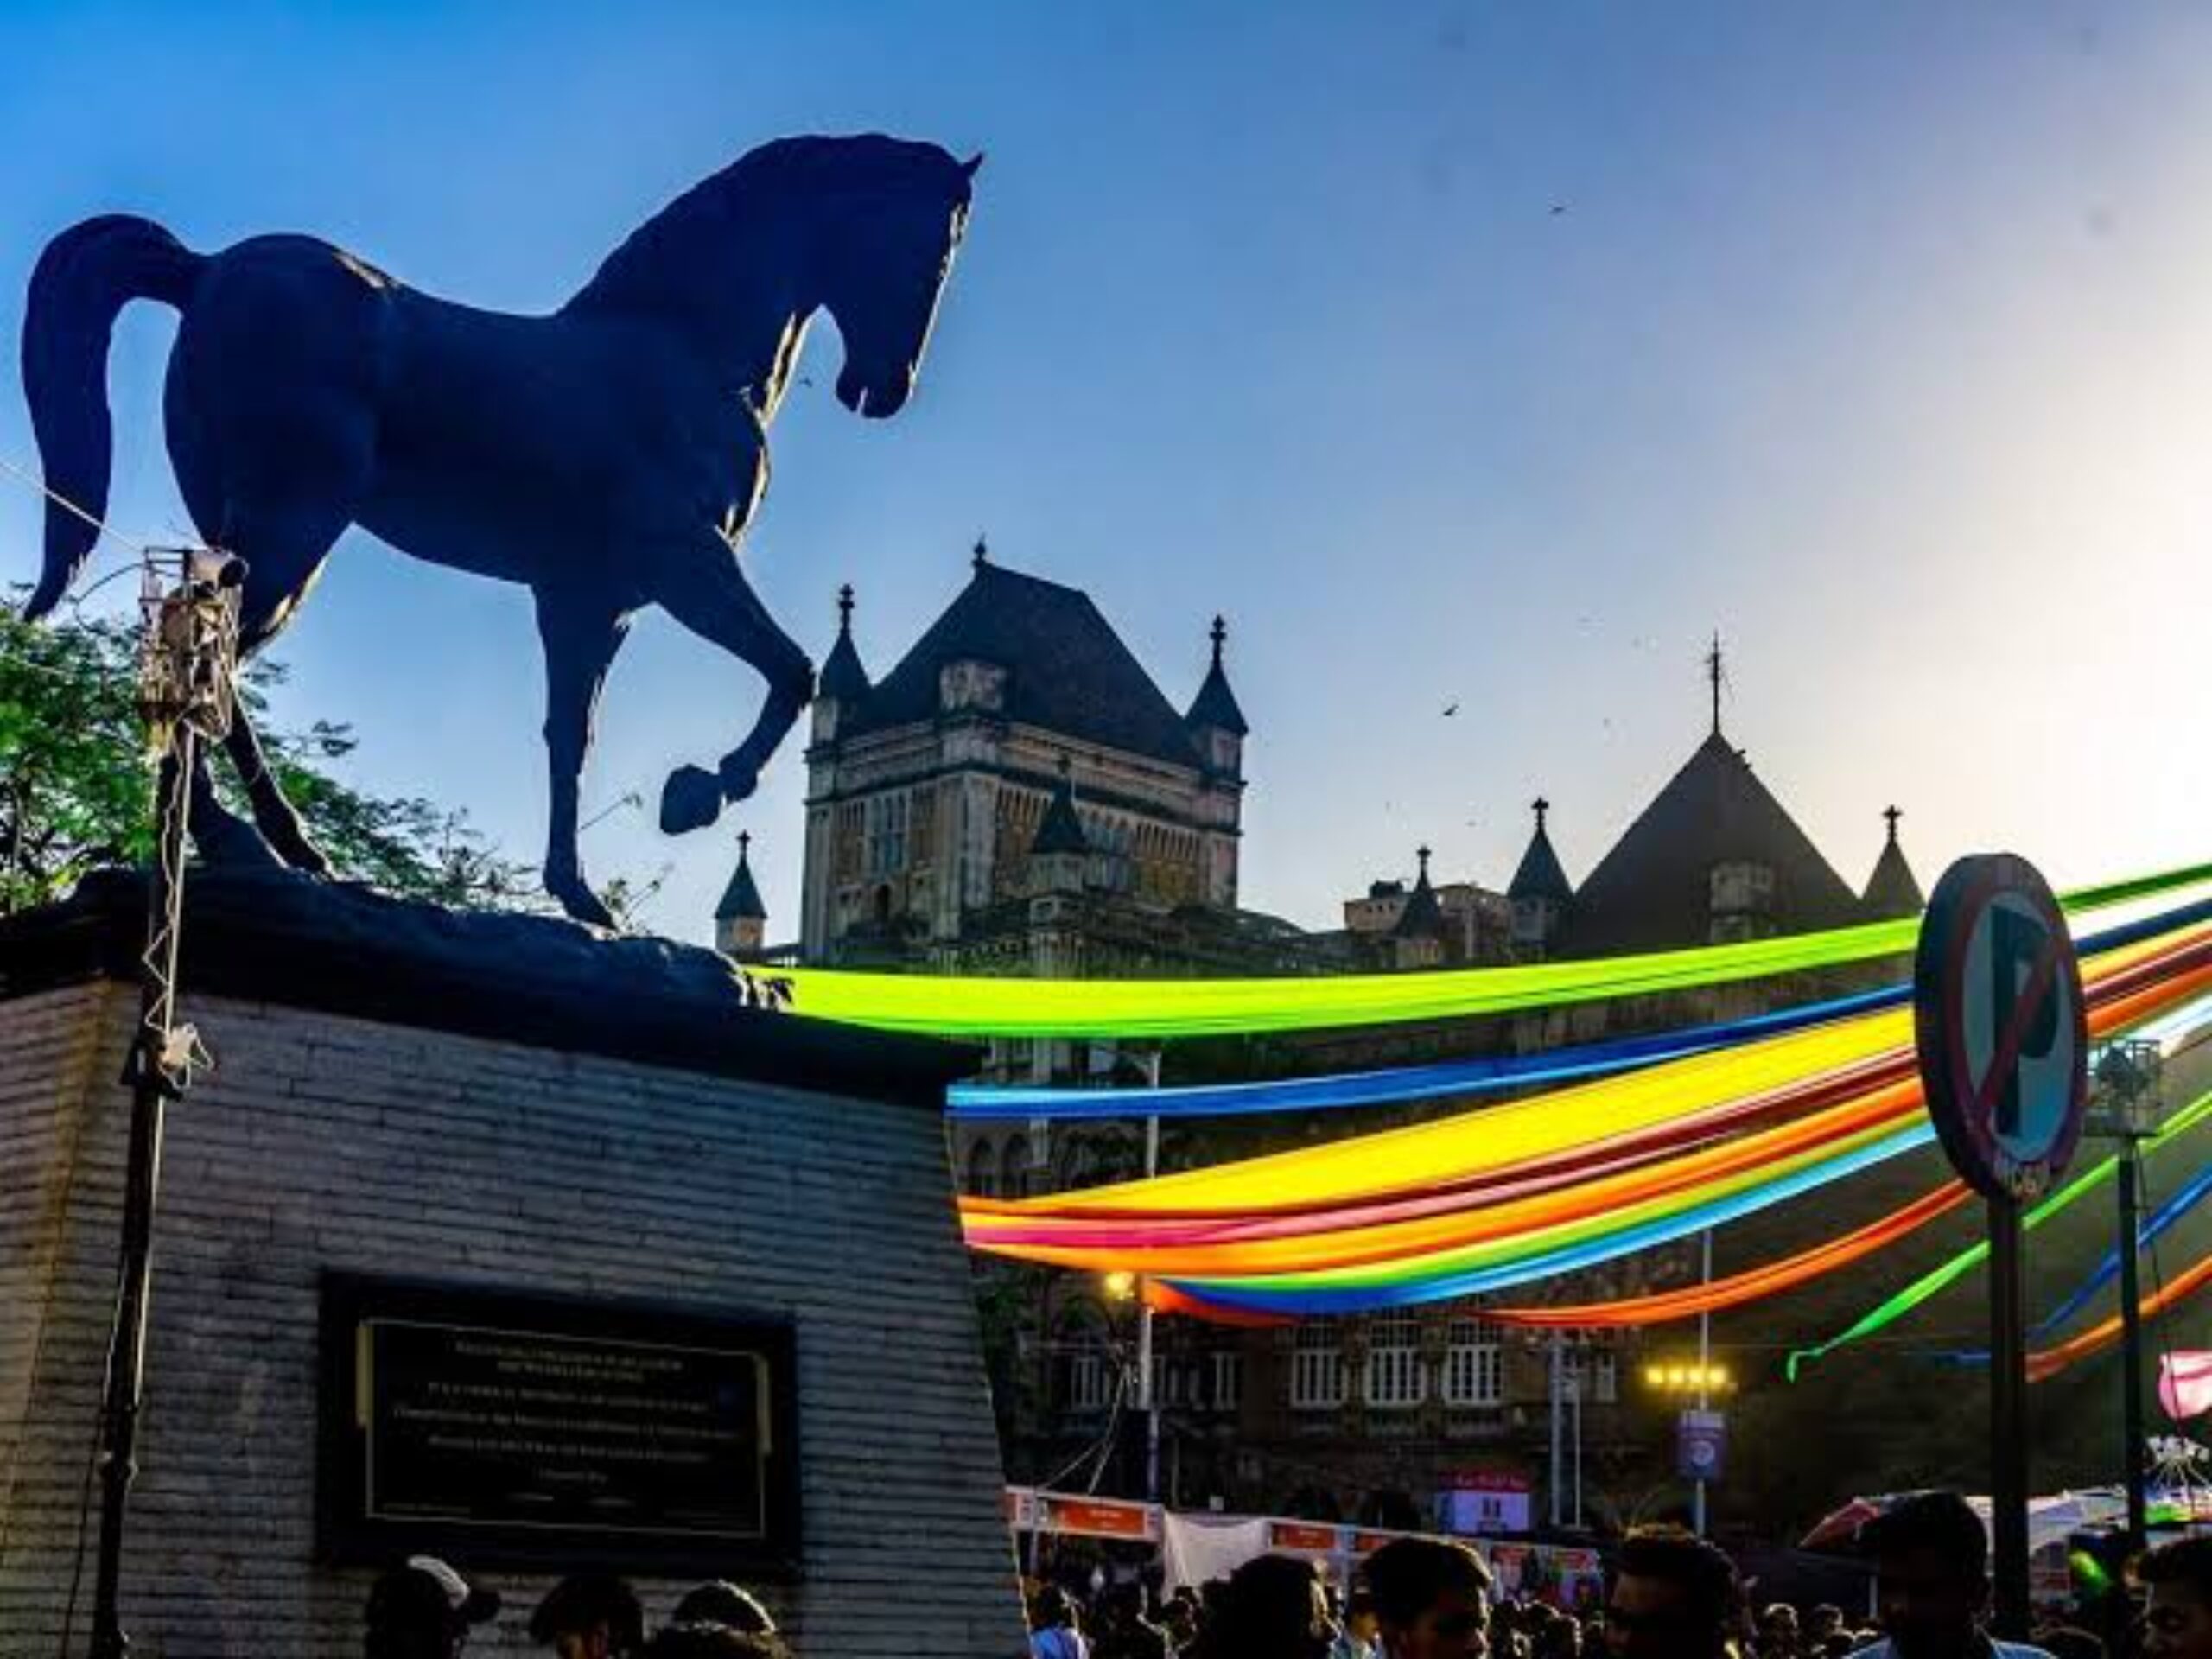 The Kala Ghoda festival takes place in a neighborhood of Mumbai, a short 10-minute drive away from the budget hotels.